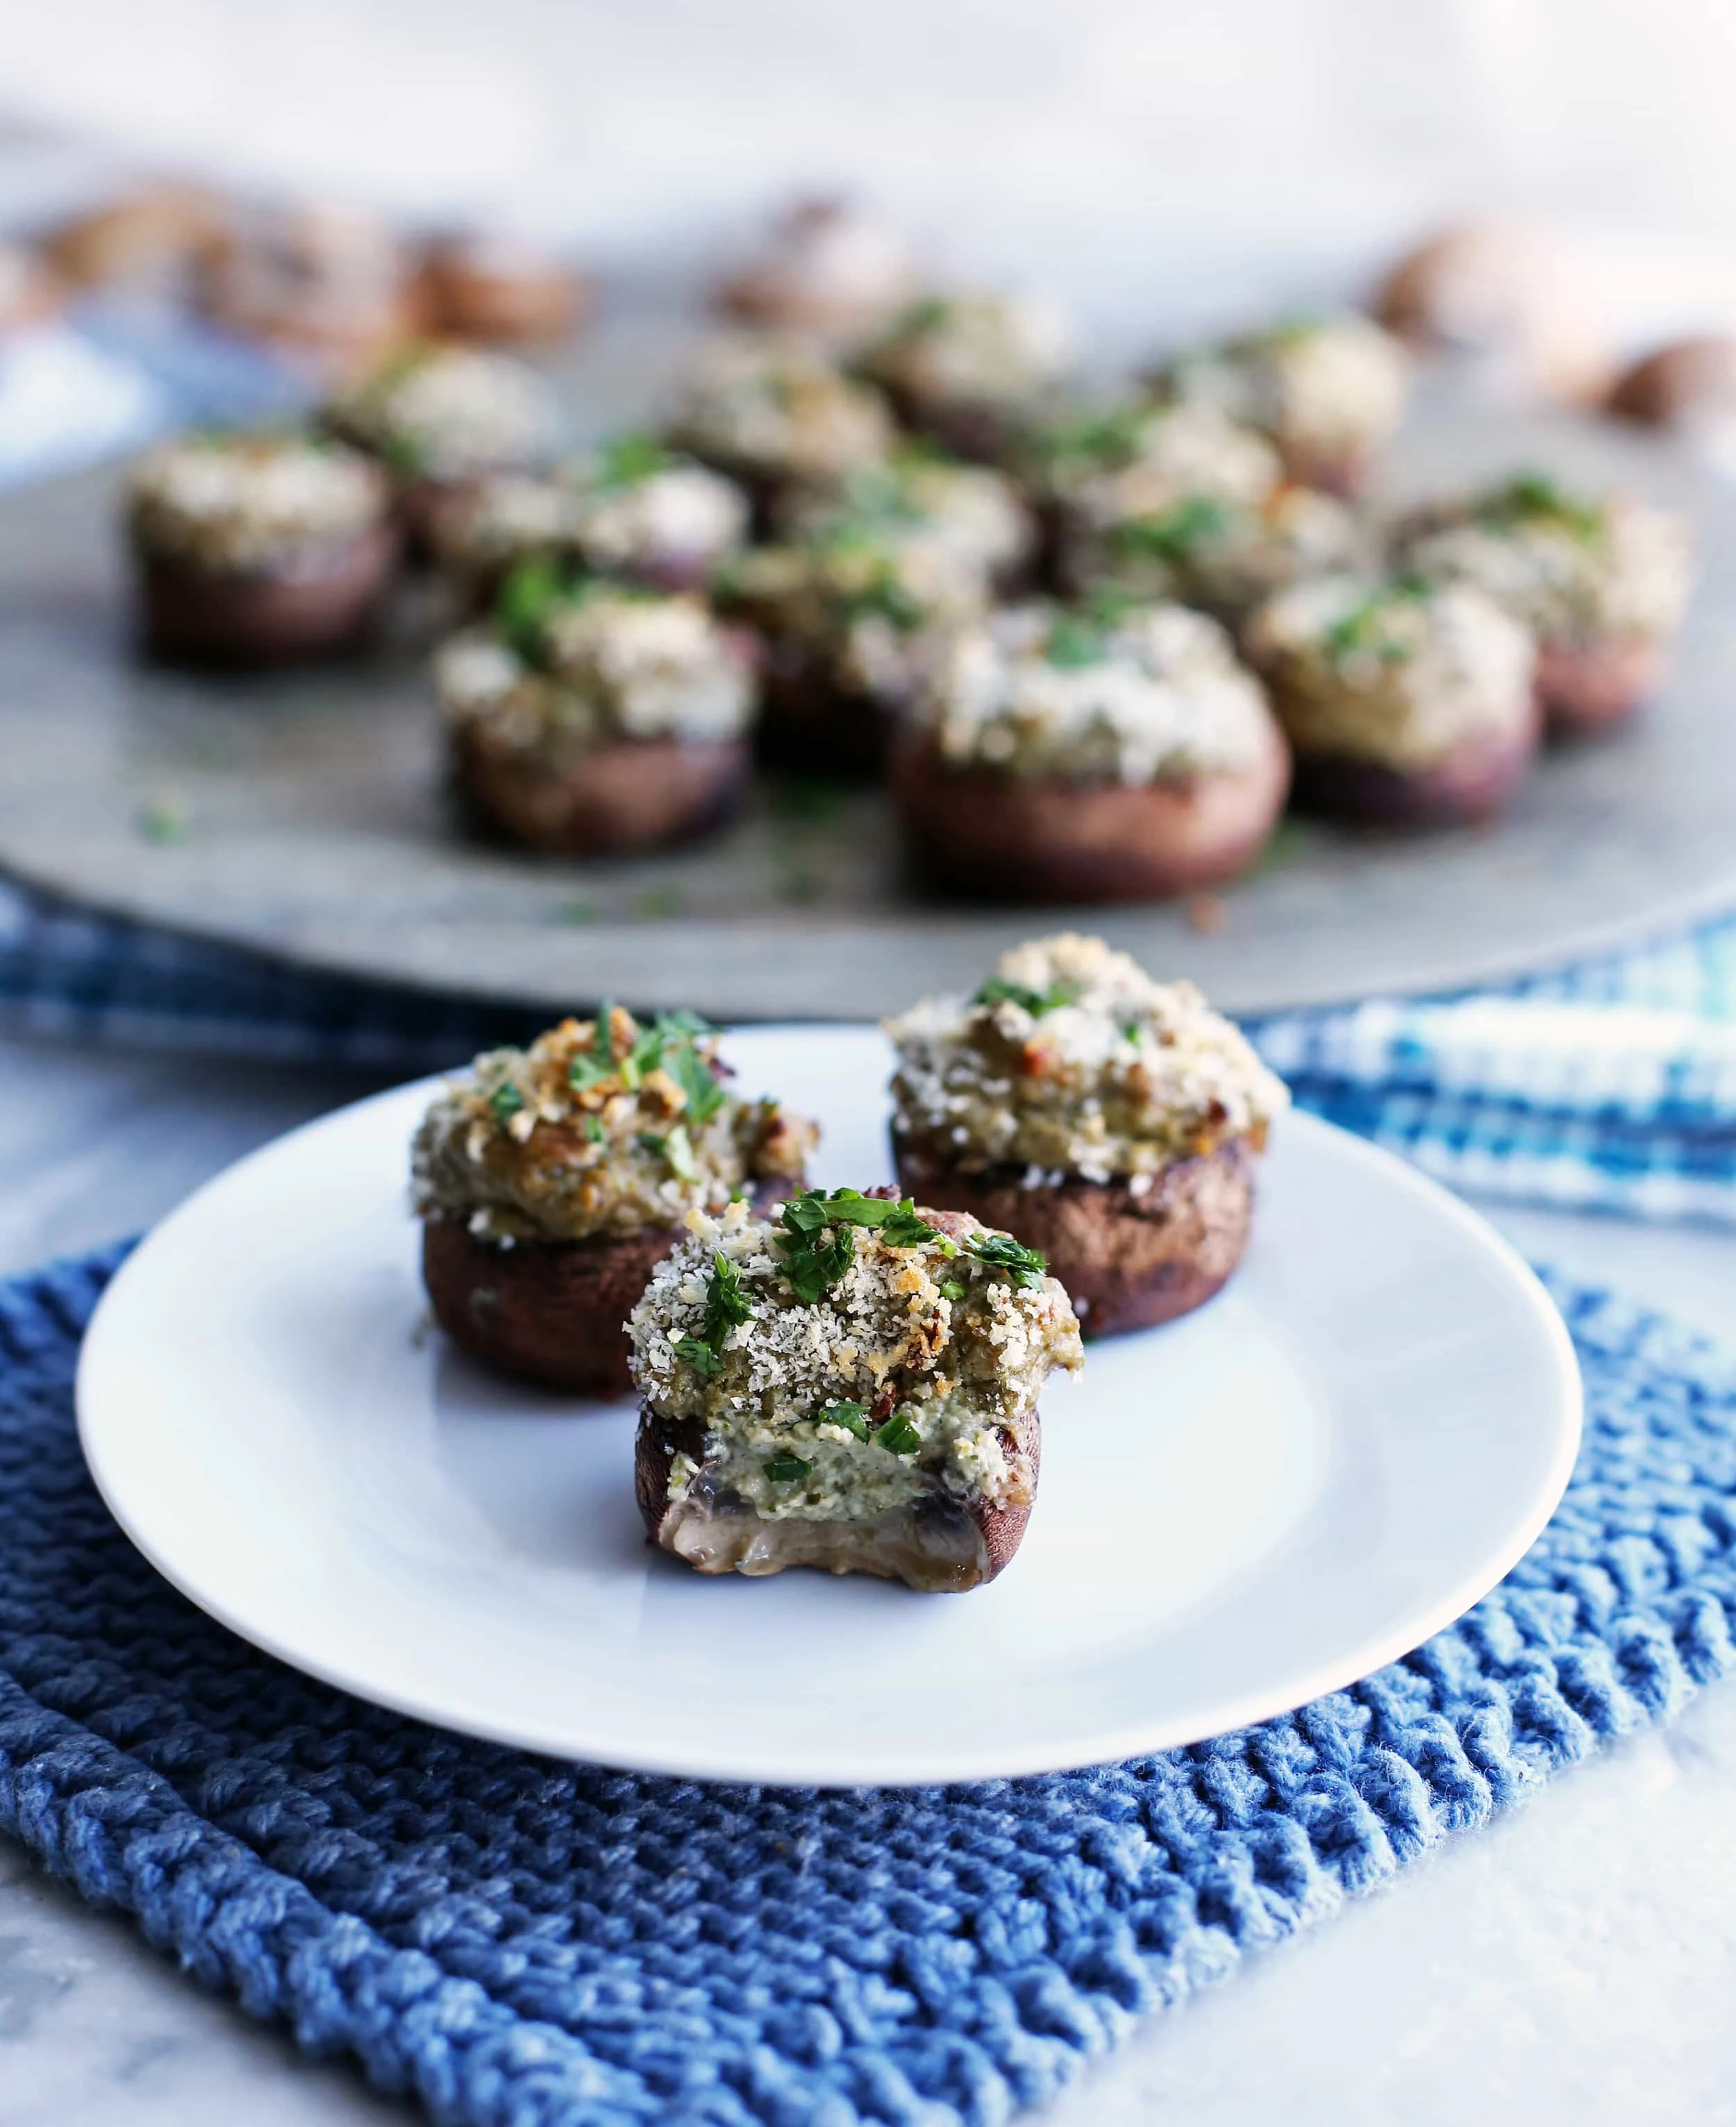 Three baked cheese stuffed mushrooms on a white plate with a bite taken out of one.